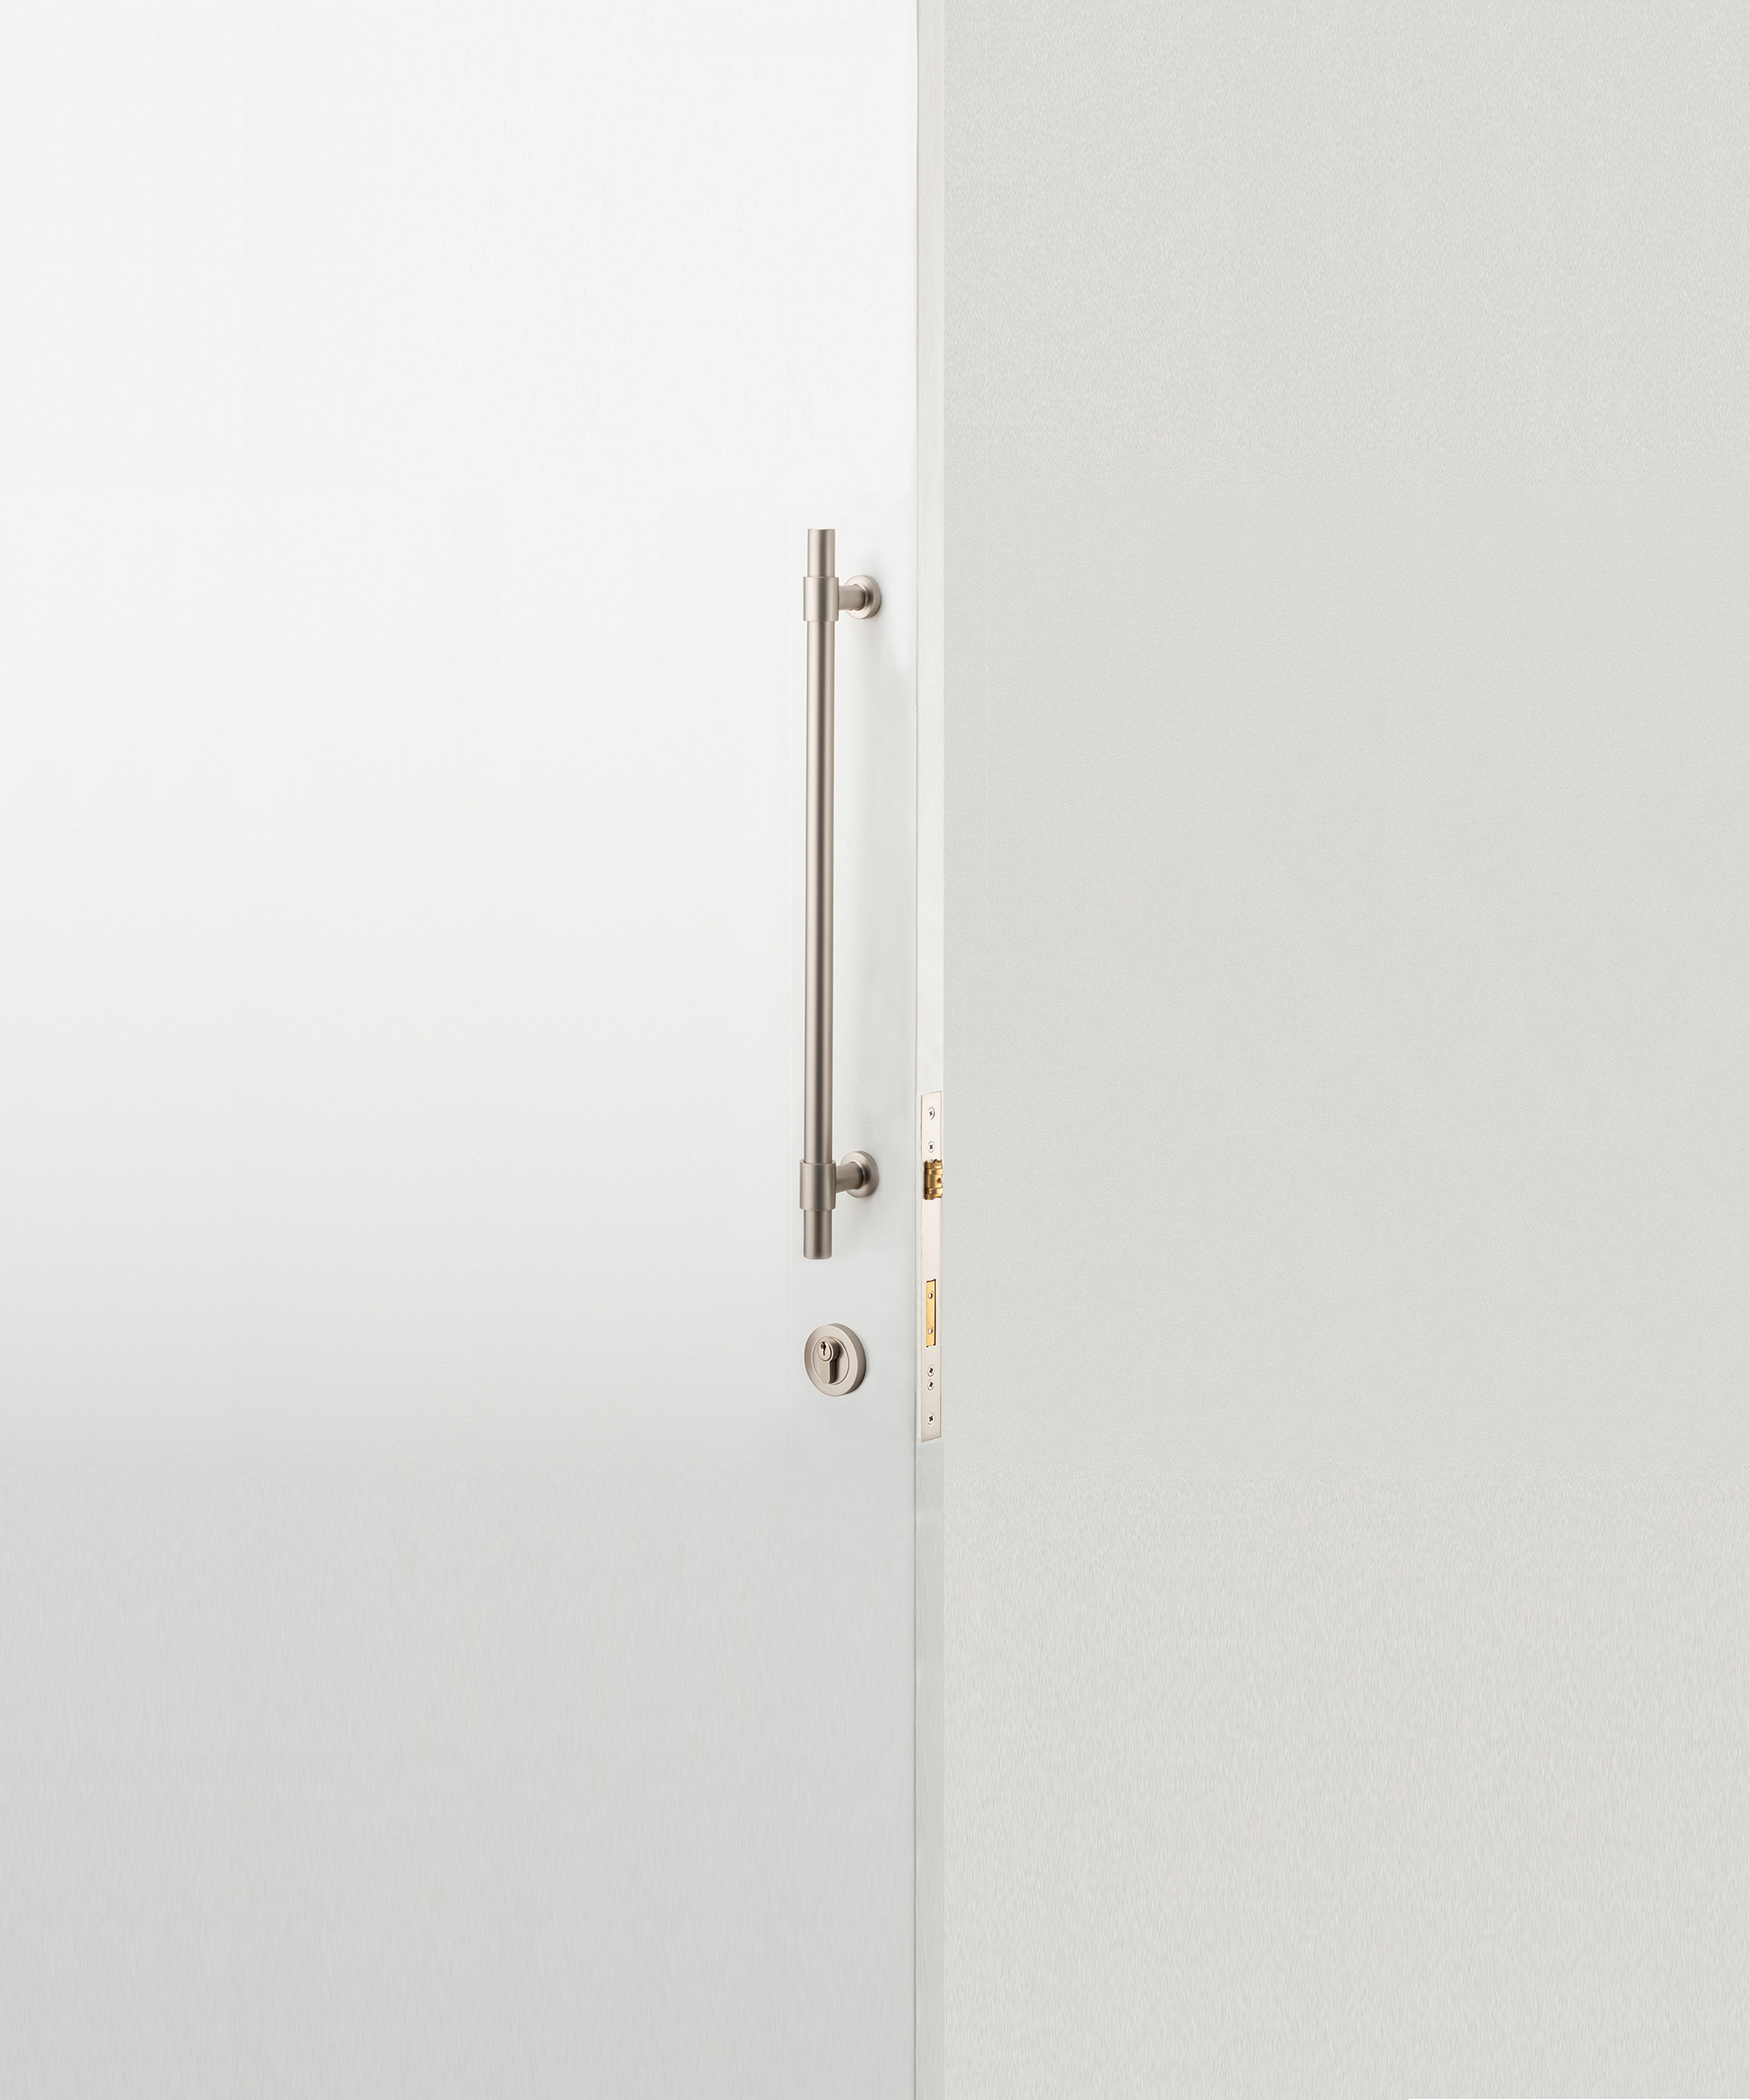 9440KENTR60KK - Berlin Pull Handle - 450mm Entrance Kit with Separate High Security Lock - Polished Brass - Entrance